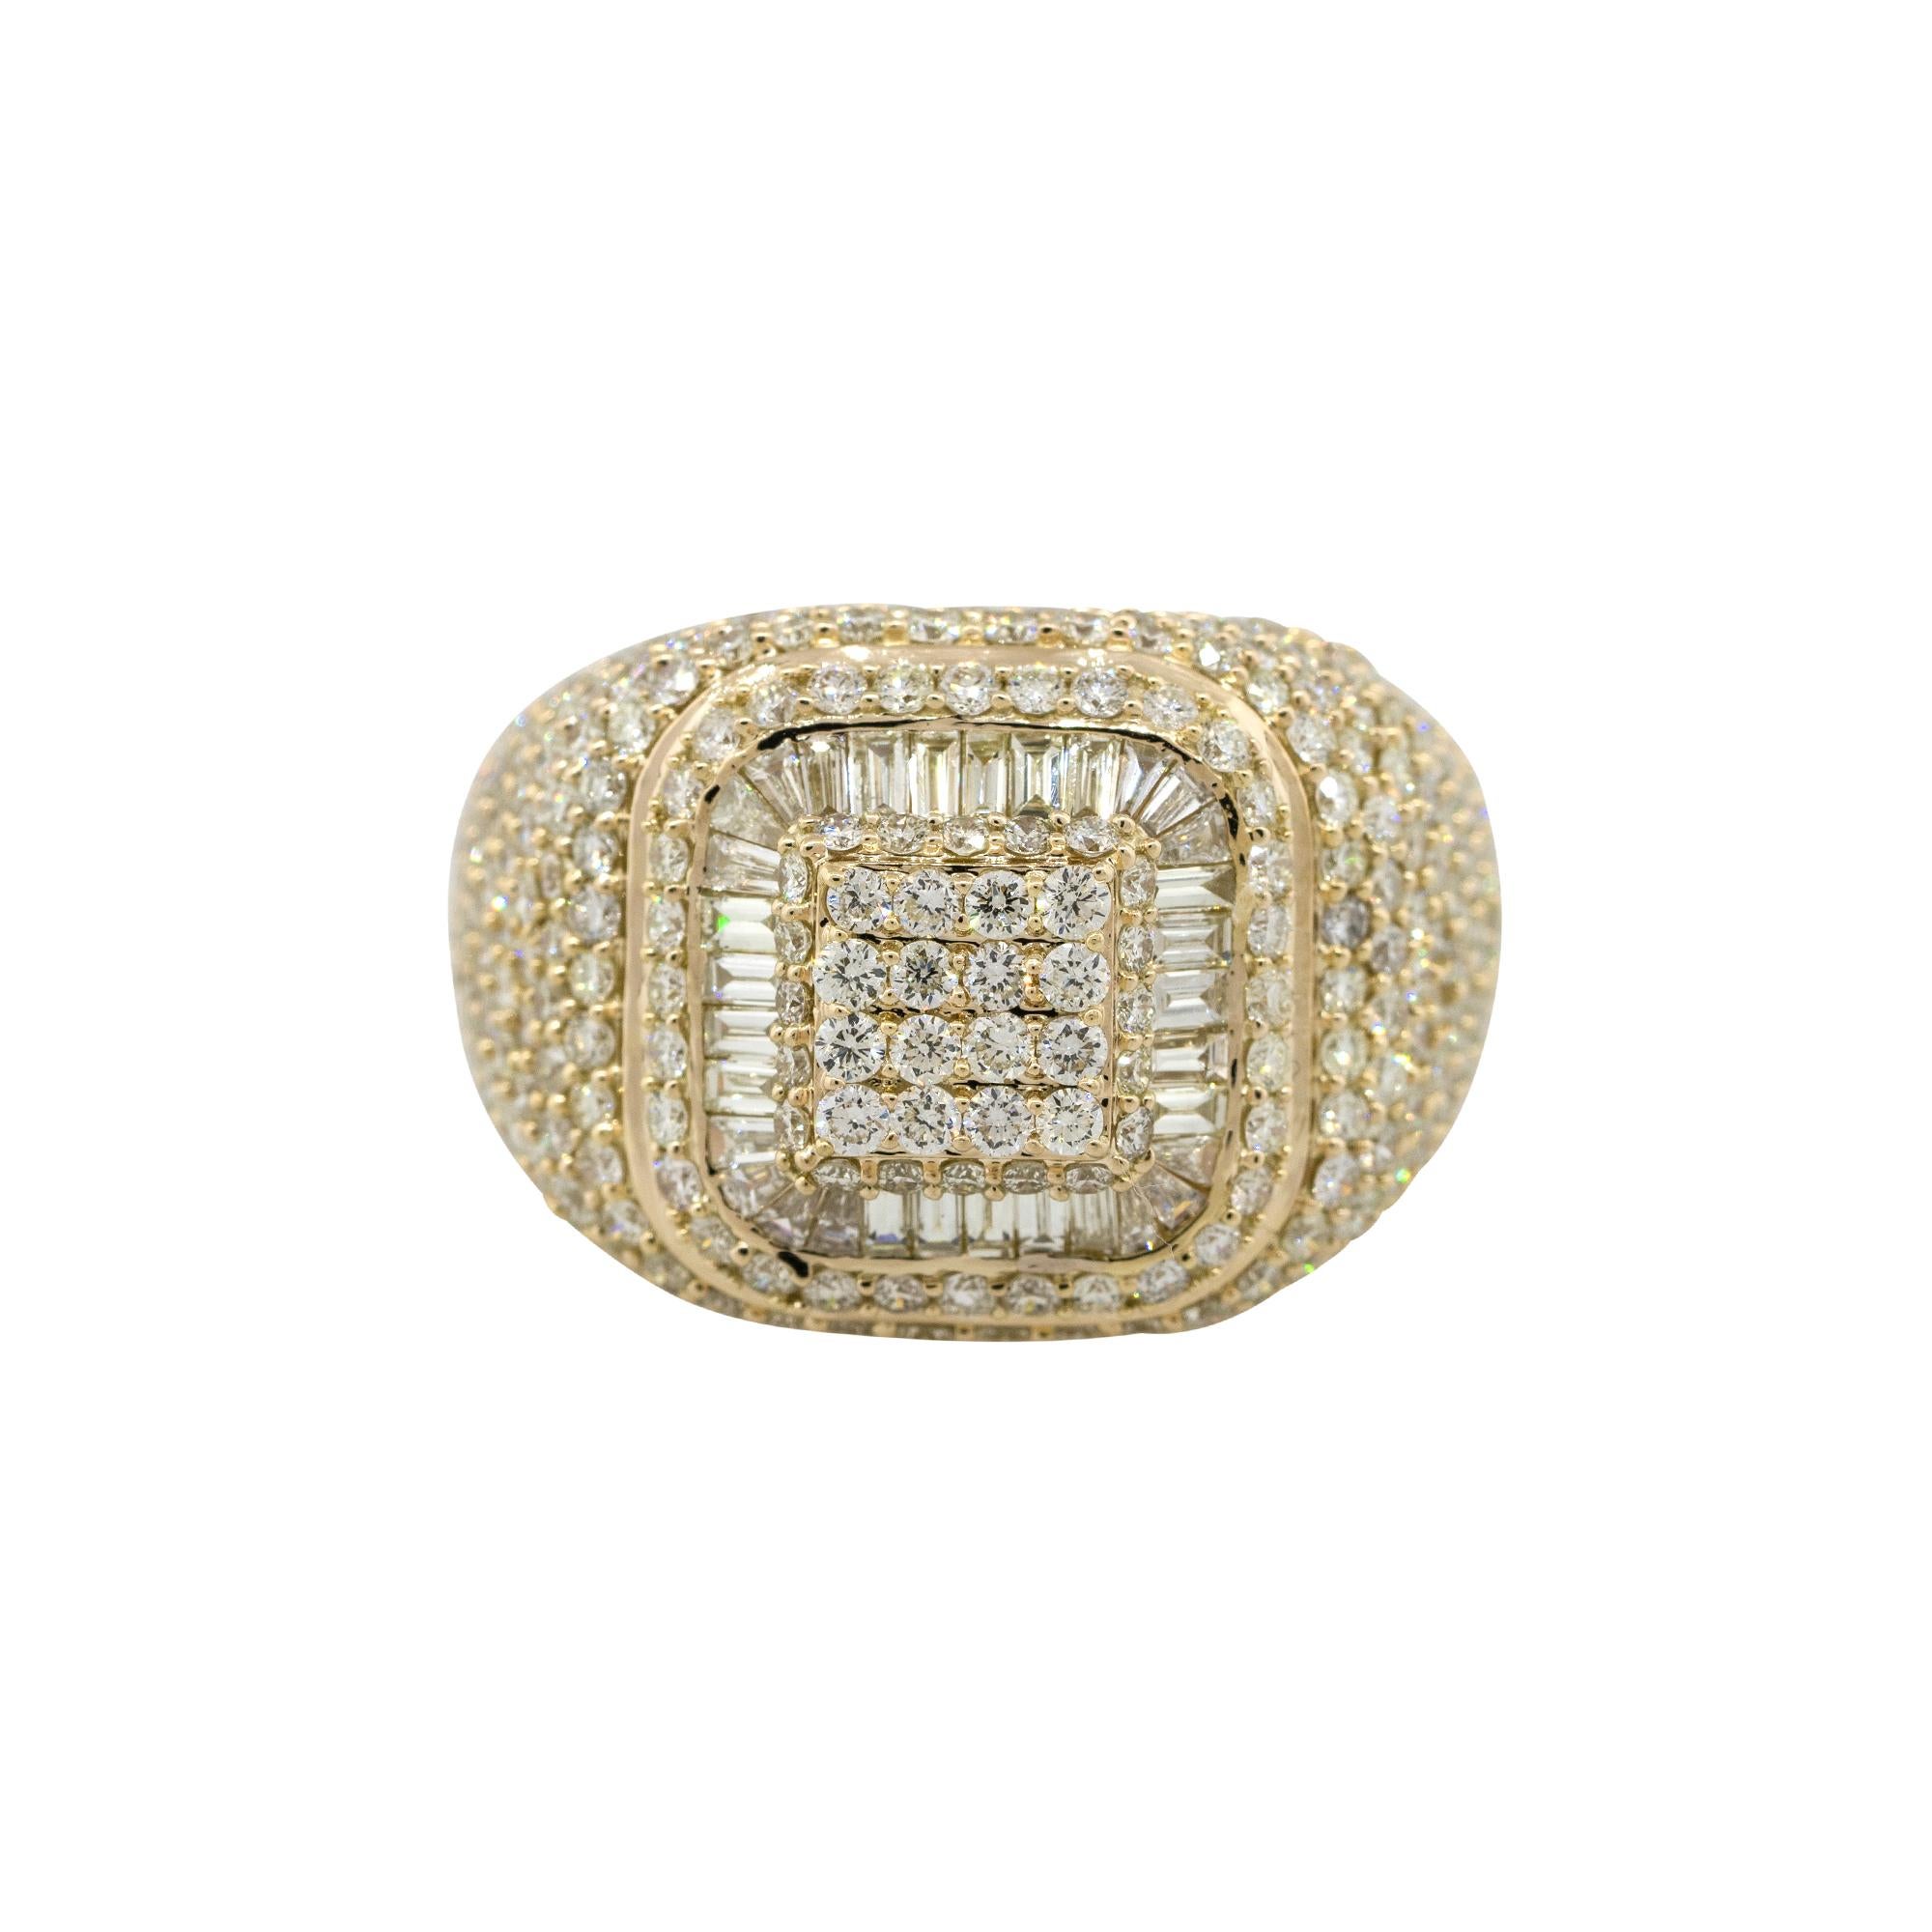 Material: 14k Yellow Gold
Diamond Details: Approx. 4.47ctw of round & baguette cut Diamonds. Diamonds are G/H in color and VS in clarity
Size: 9.75  
Measurements: 25 x 17 x 30mm
Weight: 10.6g  (6.9dwt) 
Additional Details: This item comes with a